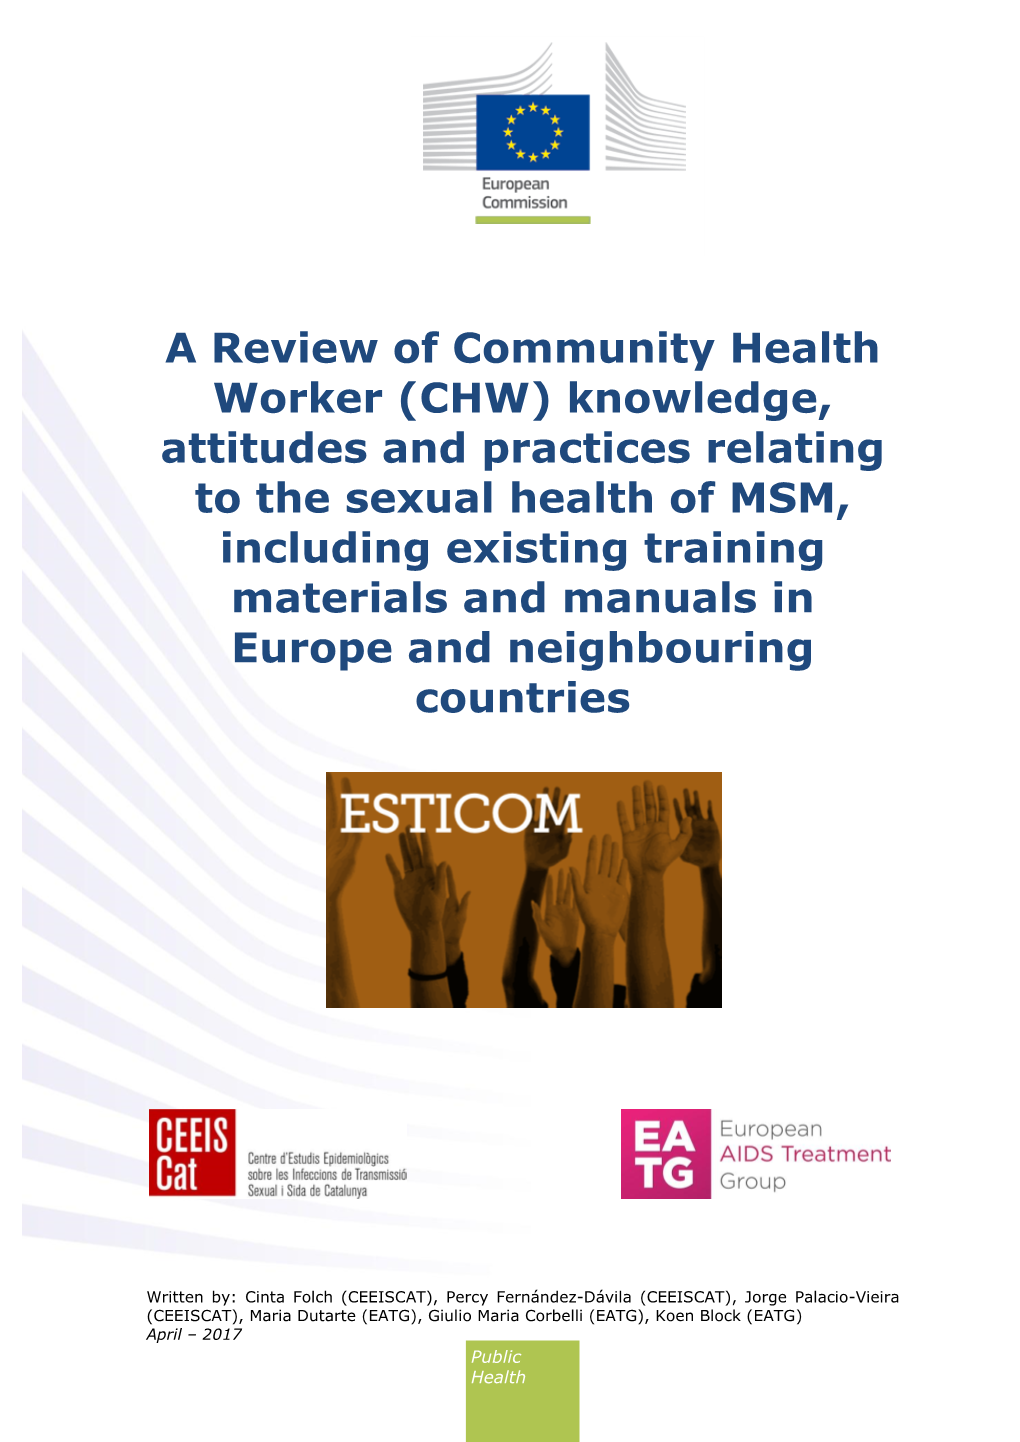 A Review of Community Health Worker (CHW) Knowledge, Attitudes